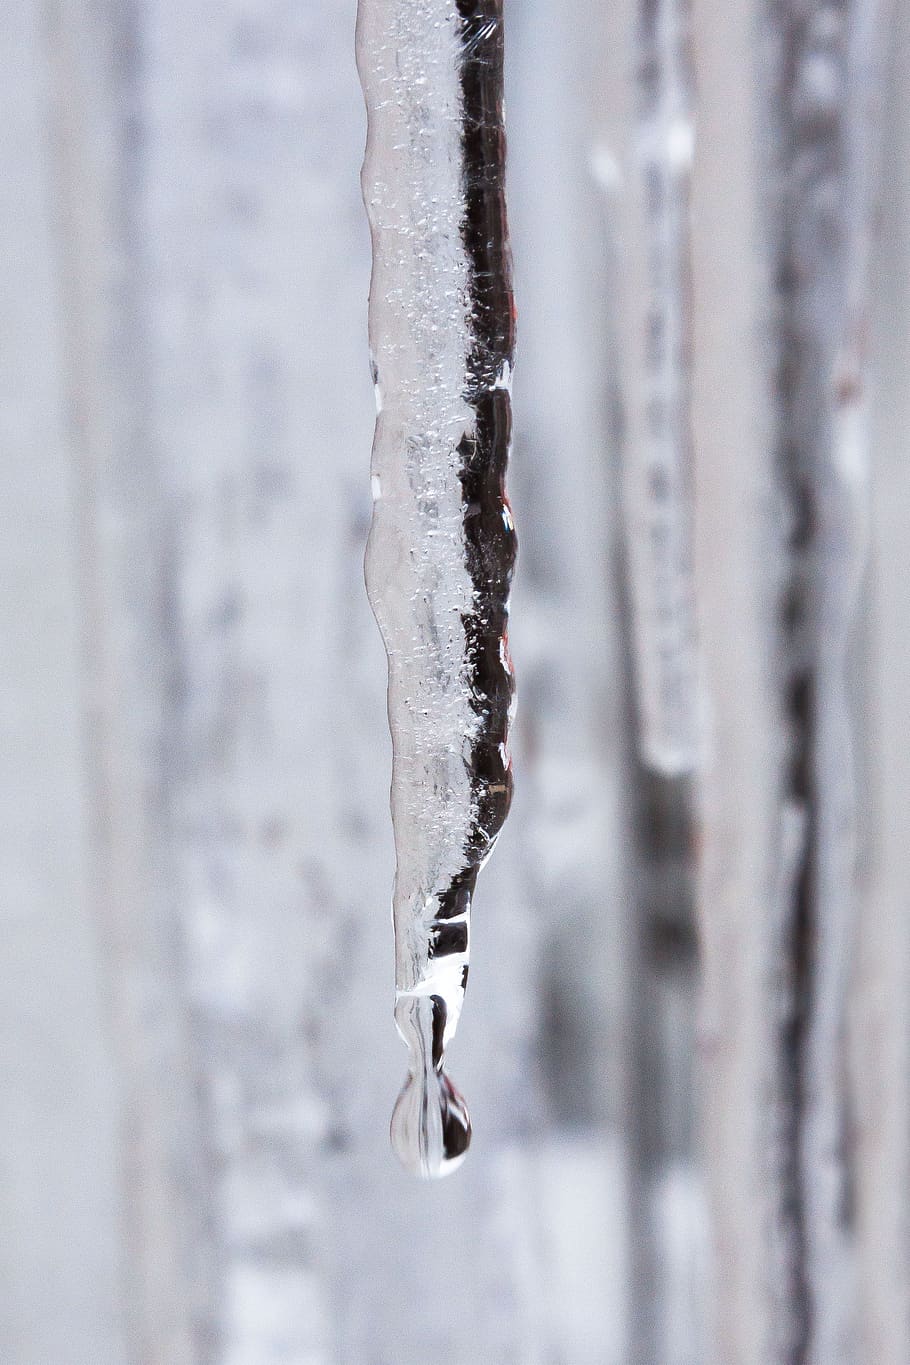 ice, icicle, drip, cold, winter, white, defrost, snow, frozen, HD wallpaper